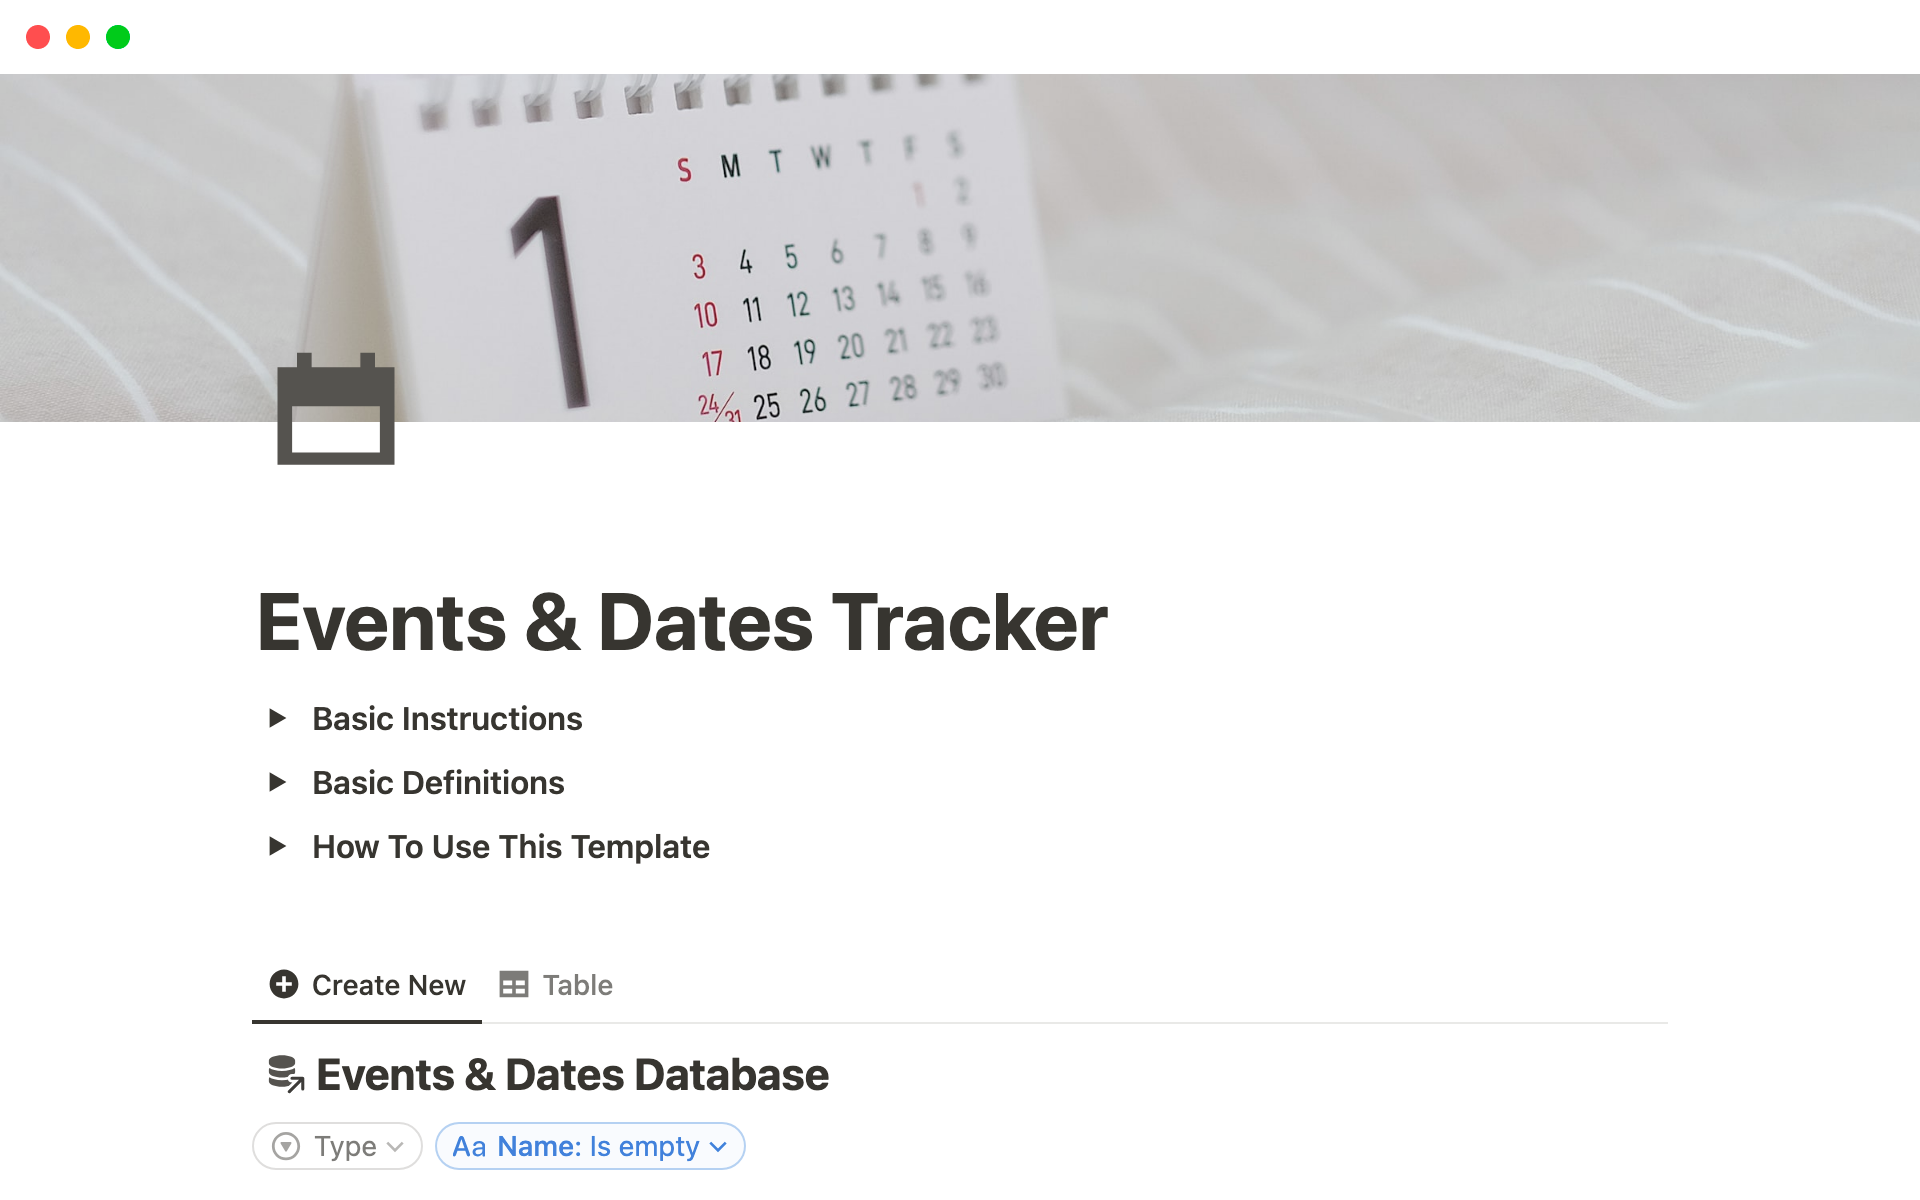 This Notion template allows you to track important dates like birthdays, holidays, and any other annual events or traditions that you might be a part of!